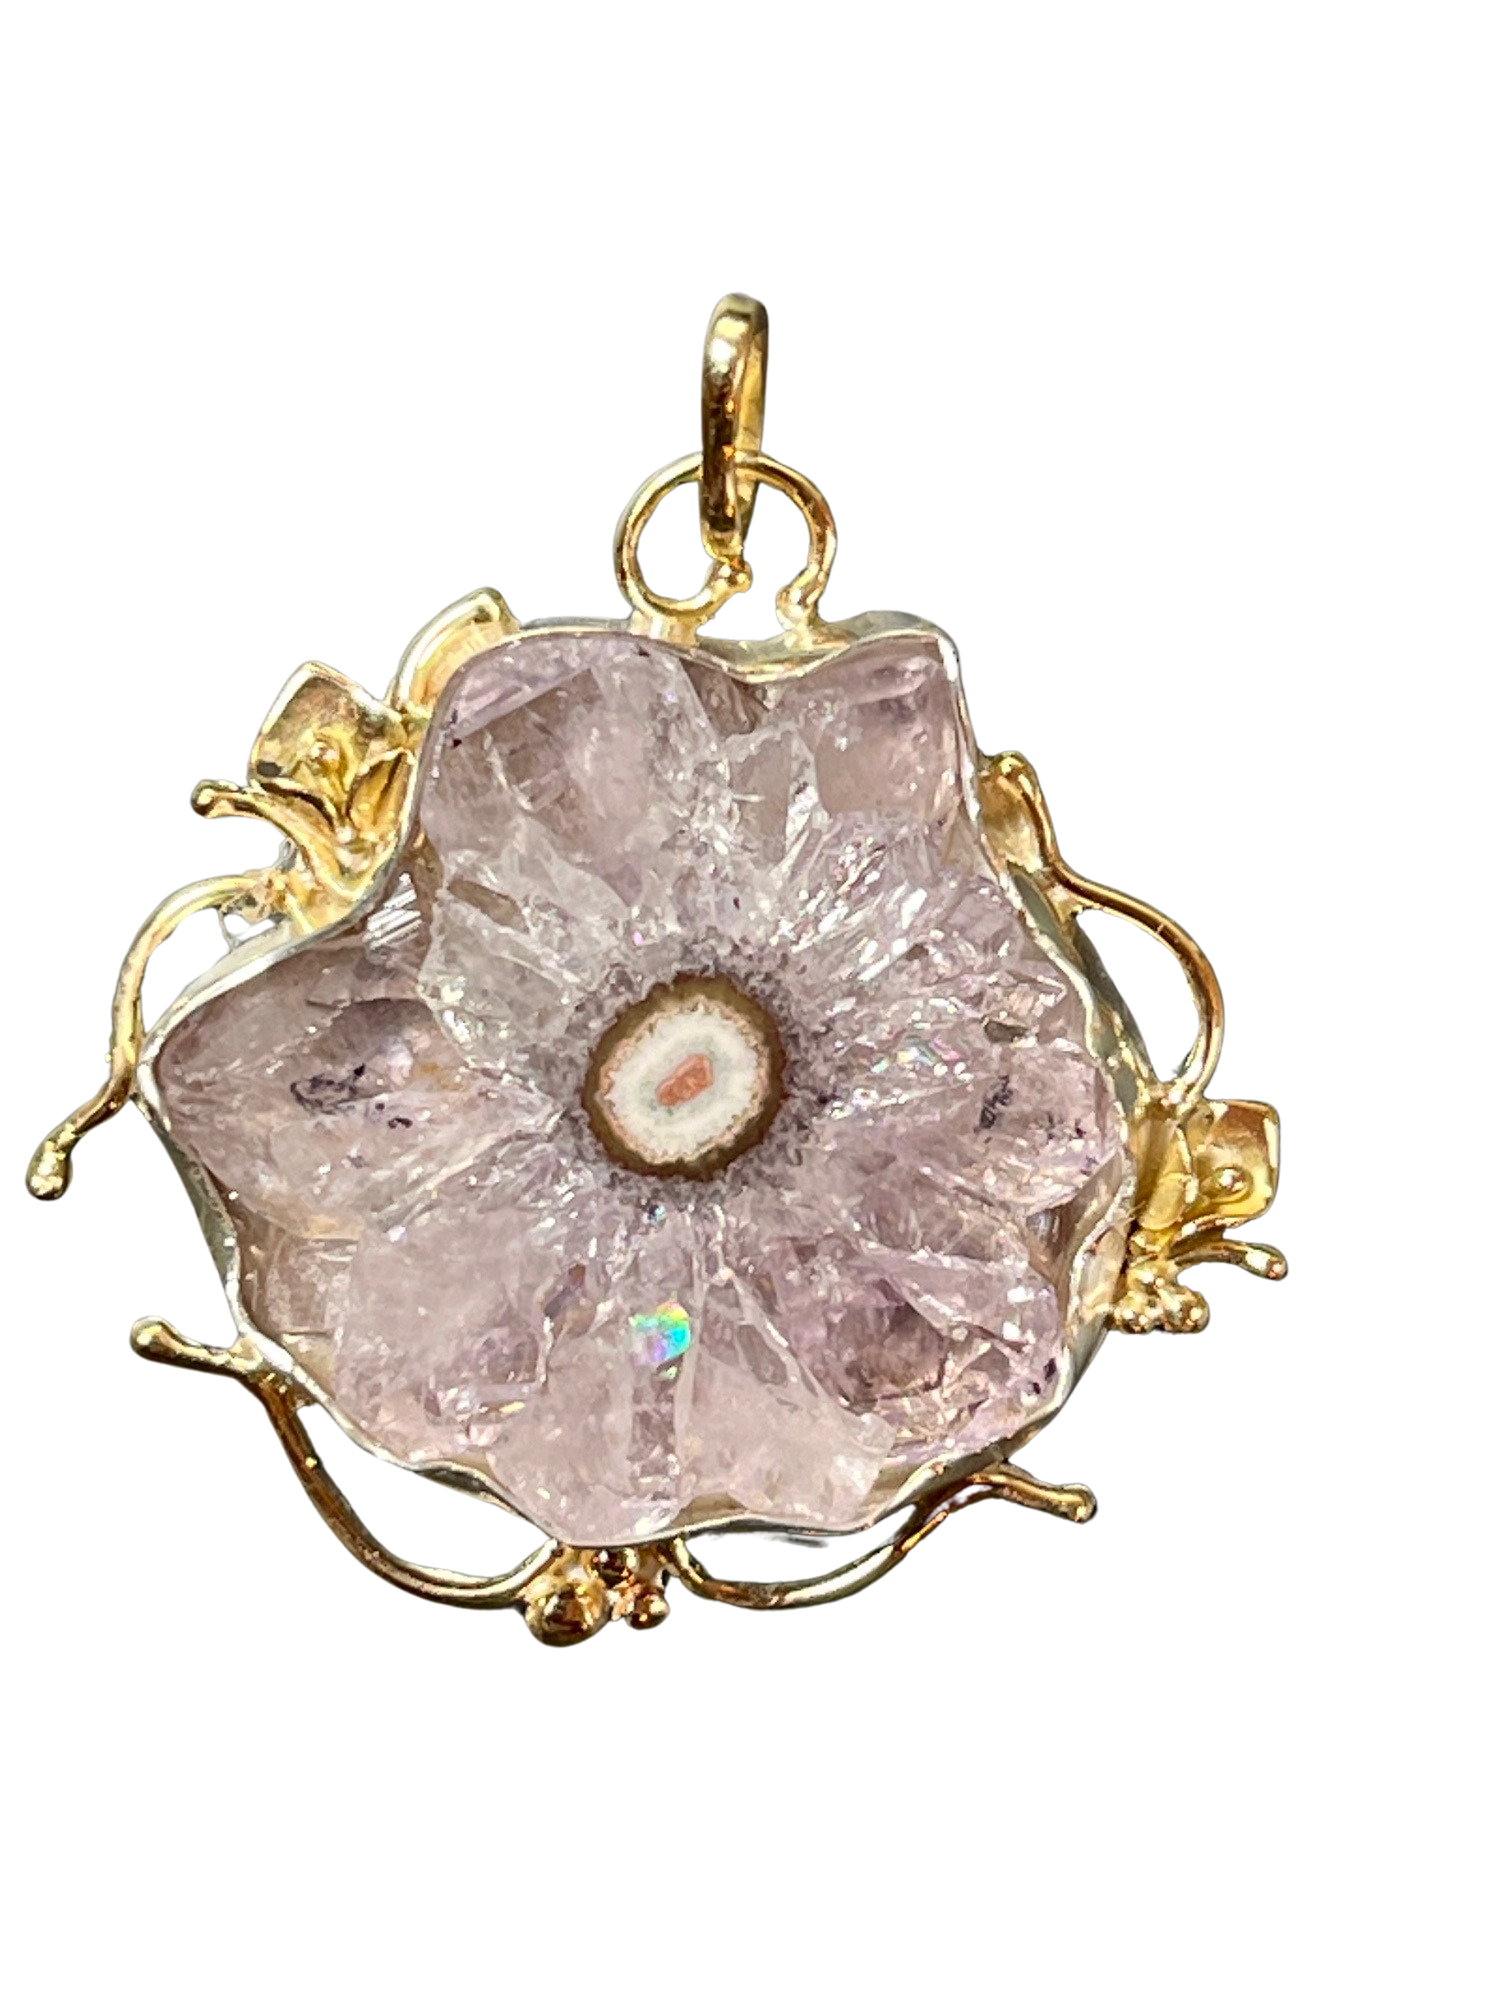 Amethyst Staclaclite #2 Sterling Silver & 14K Gold Pendant